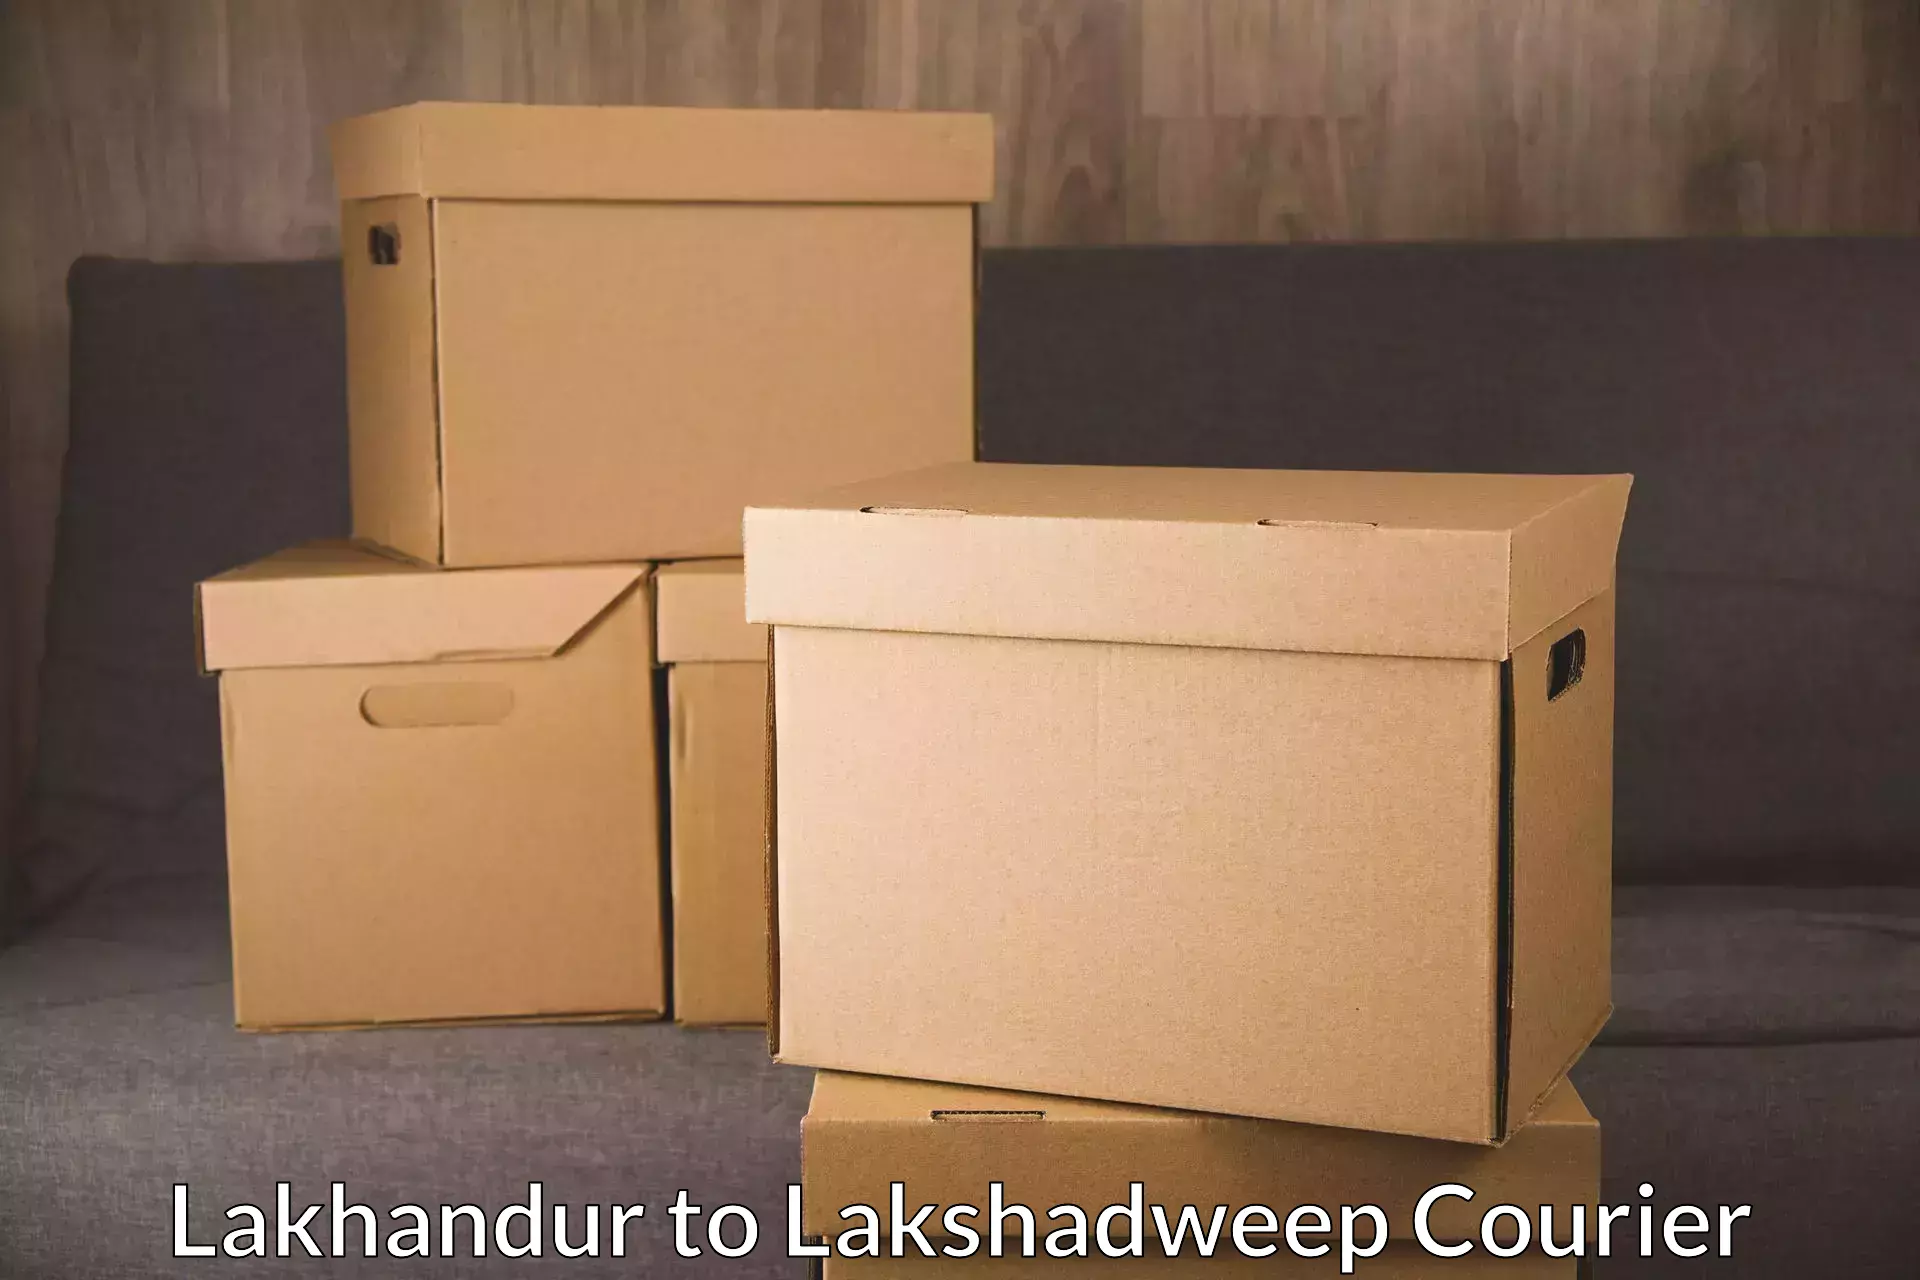 Sustainable shipping practices Lakhandur to Lakshadweep